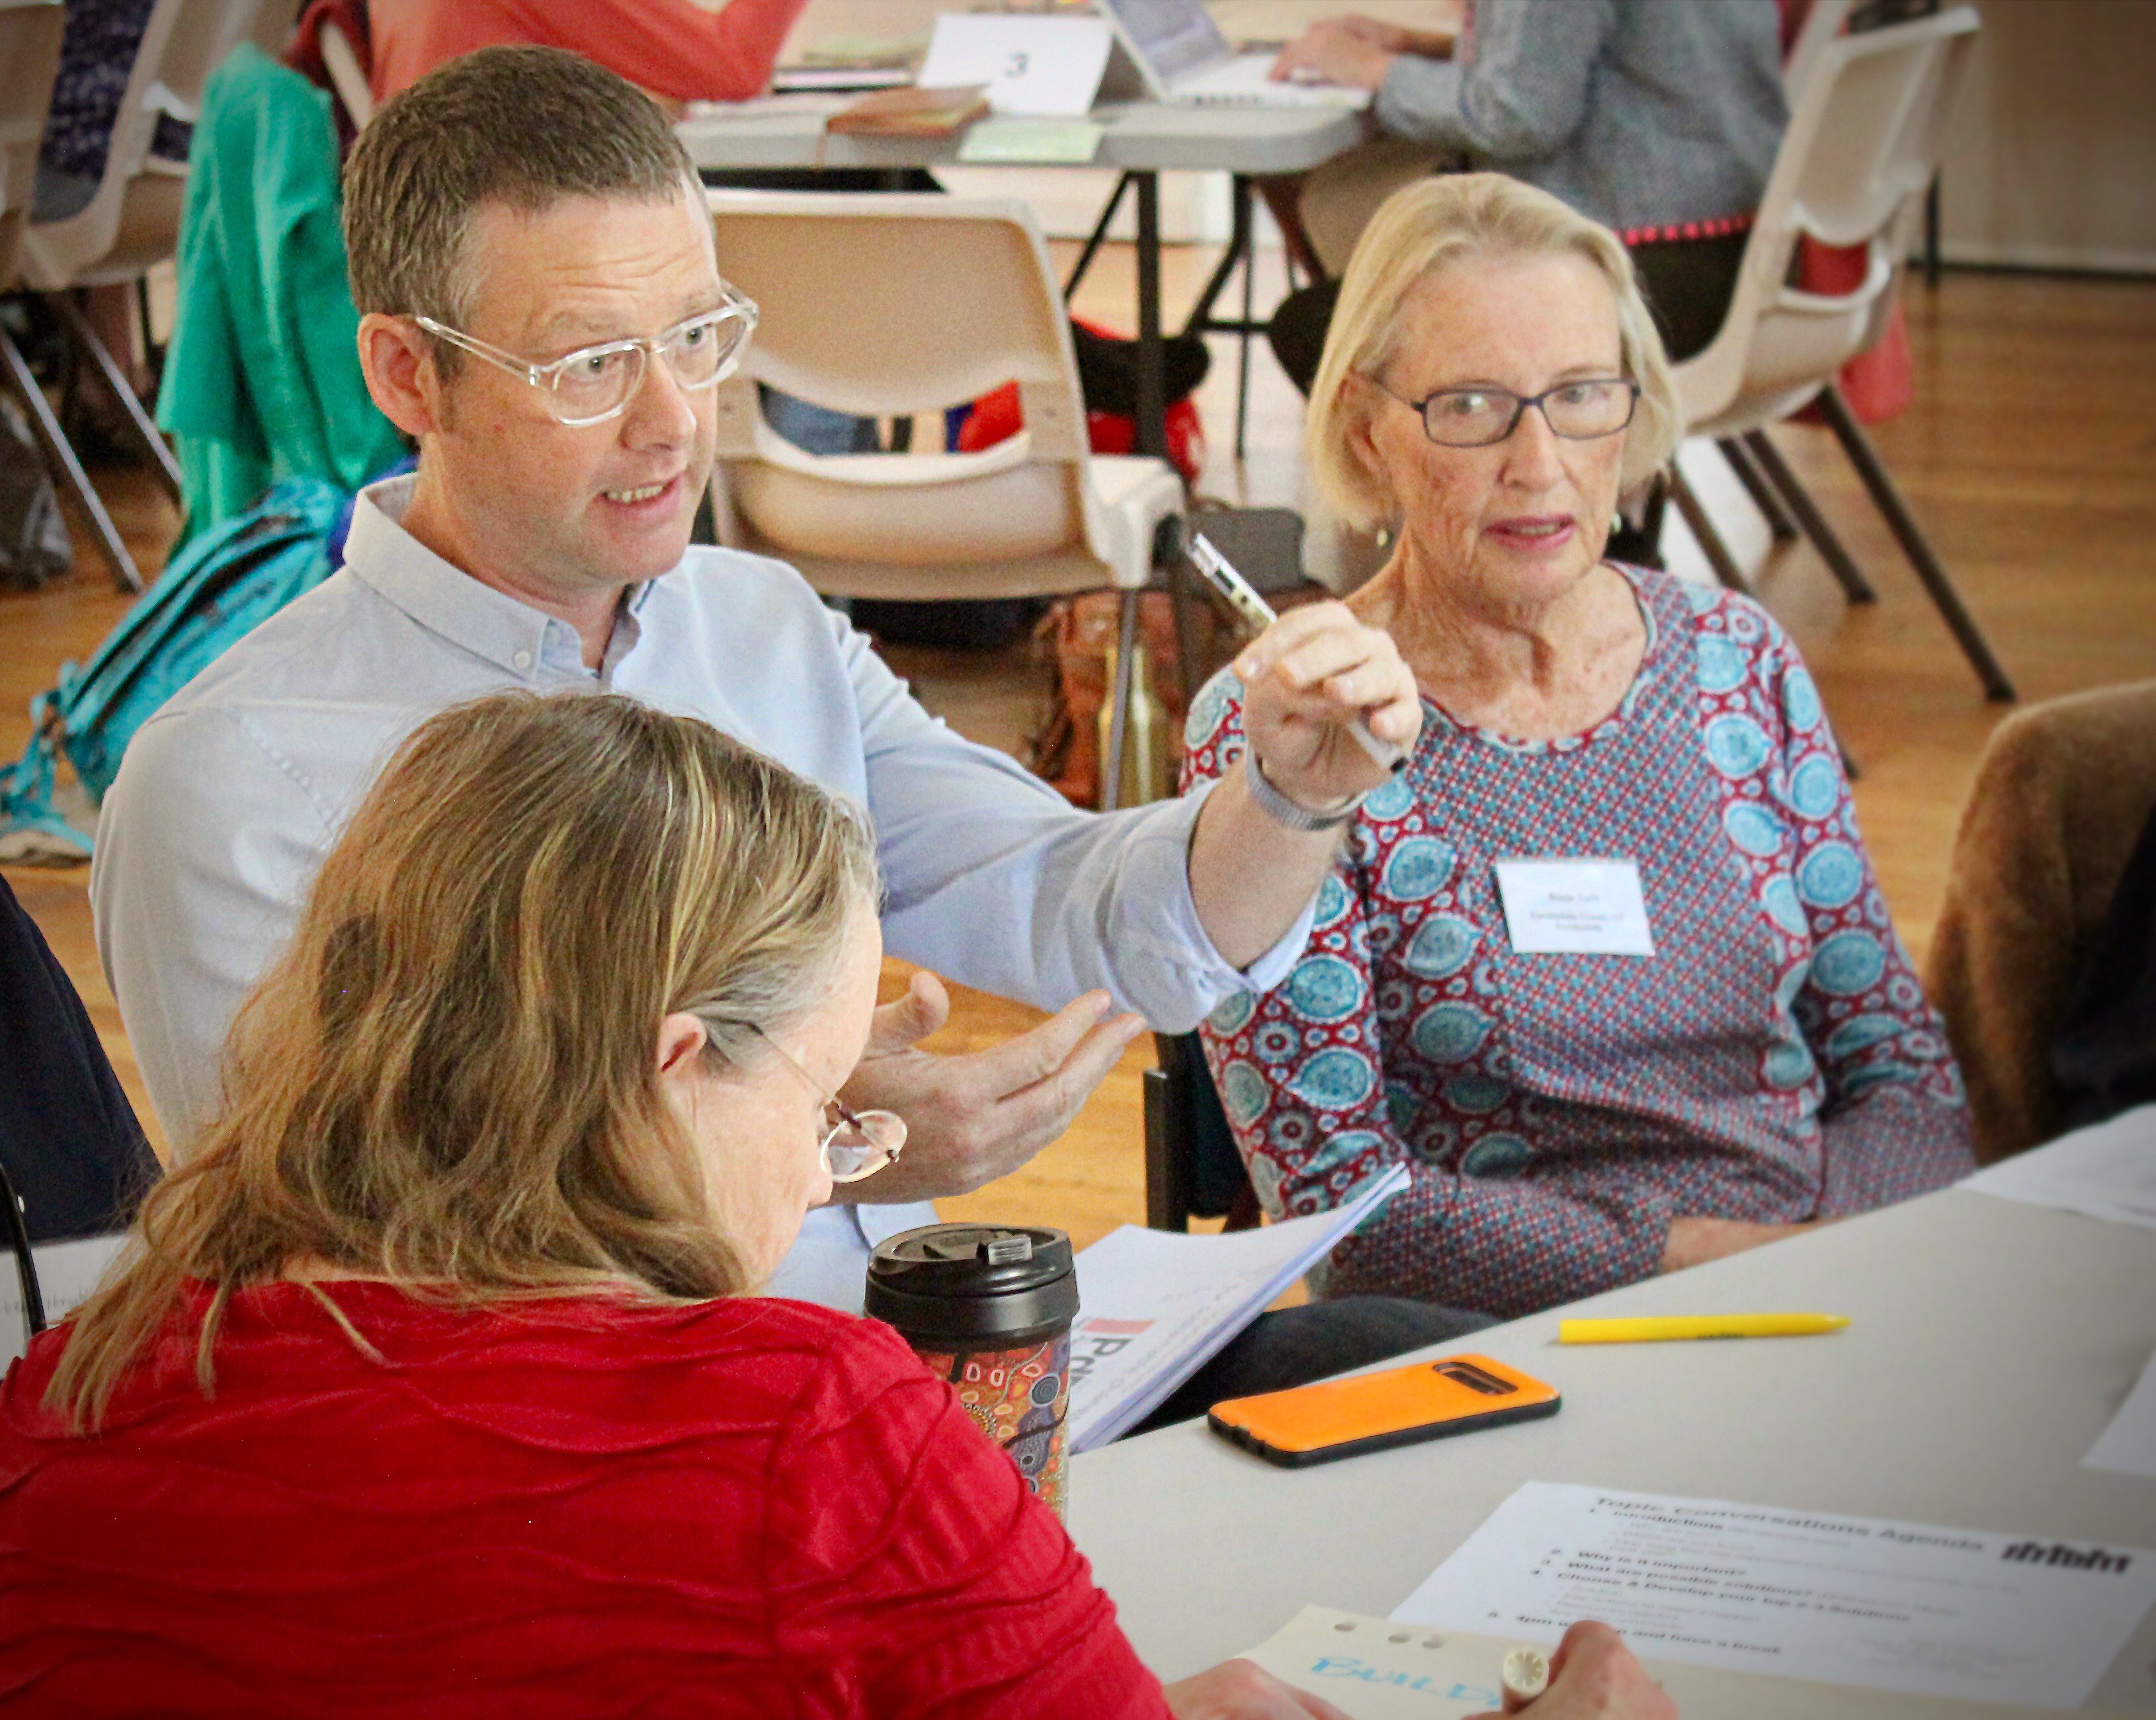 Eurobodalla residents offer passion and expertise to develop urgent climate solutions